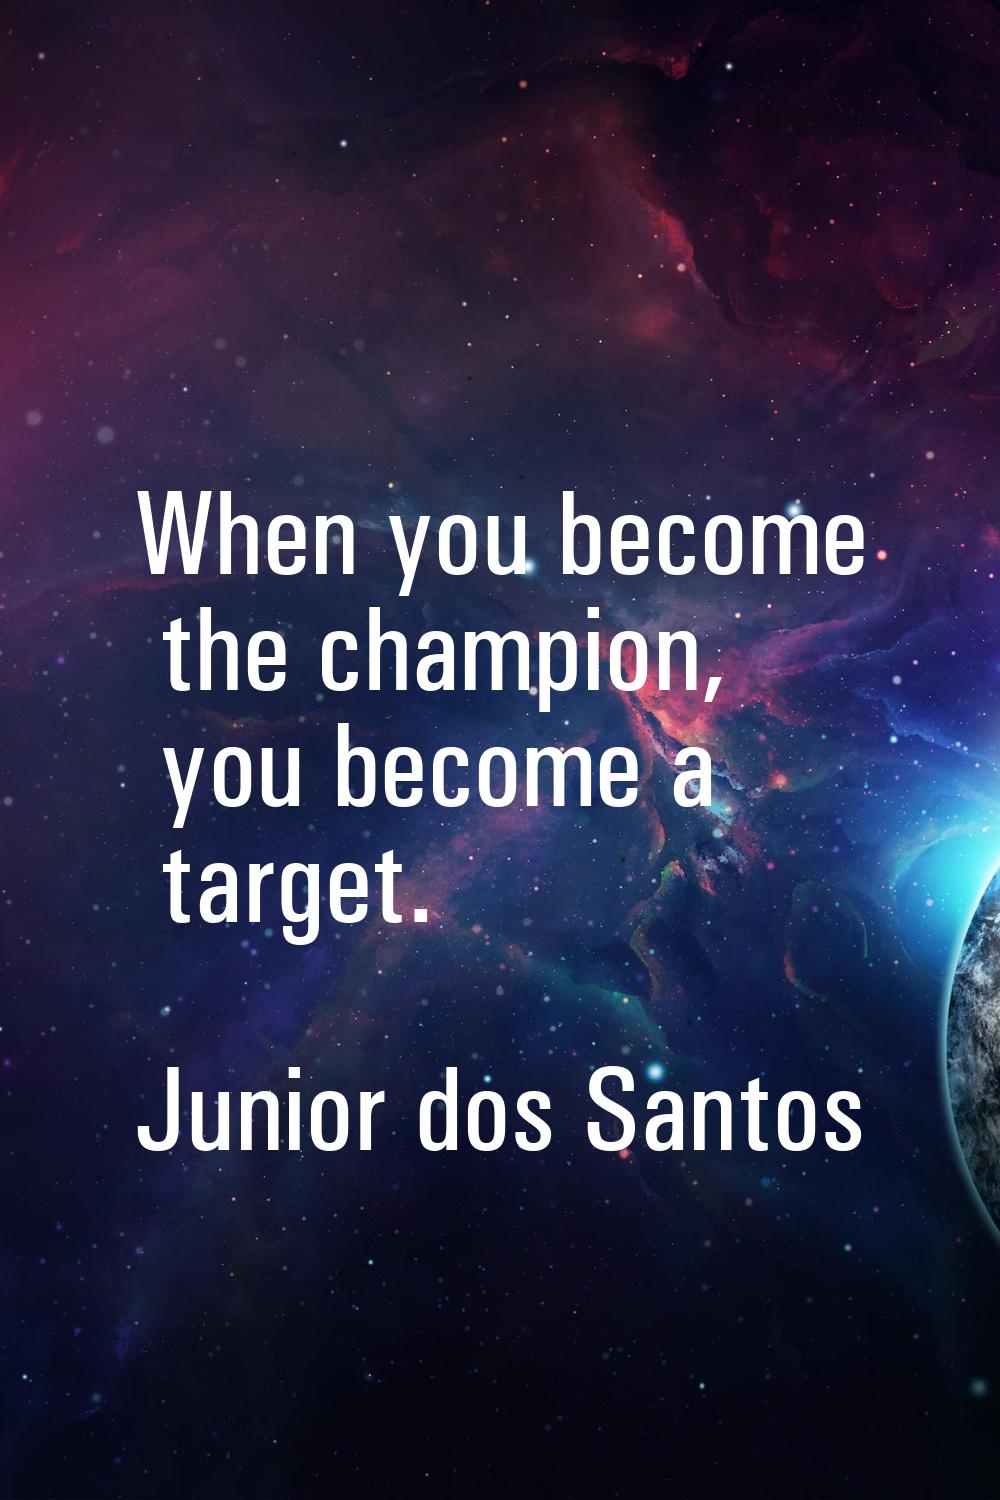 When you become the champion, you become a target.